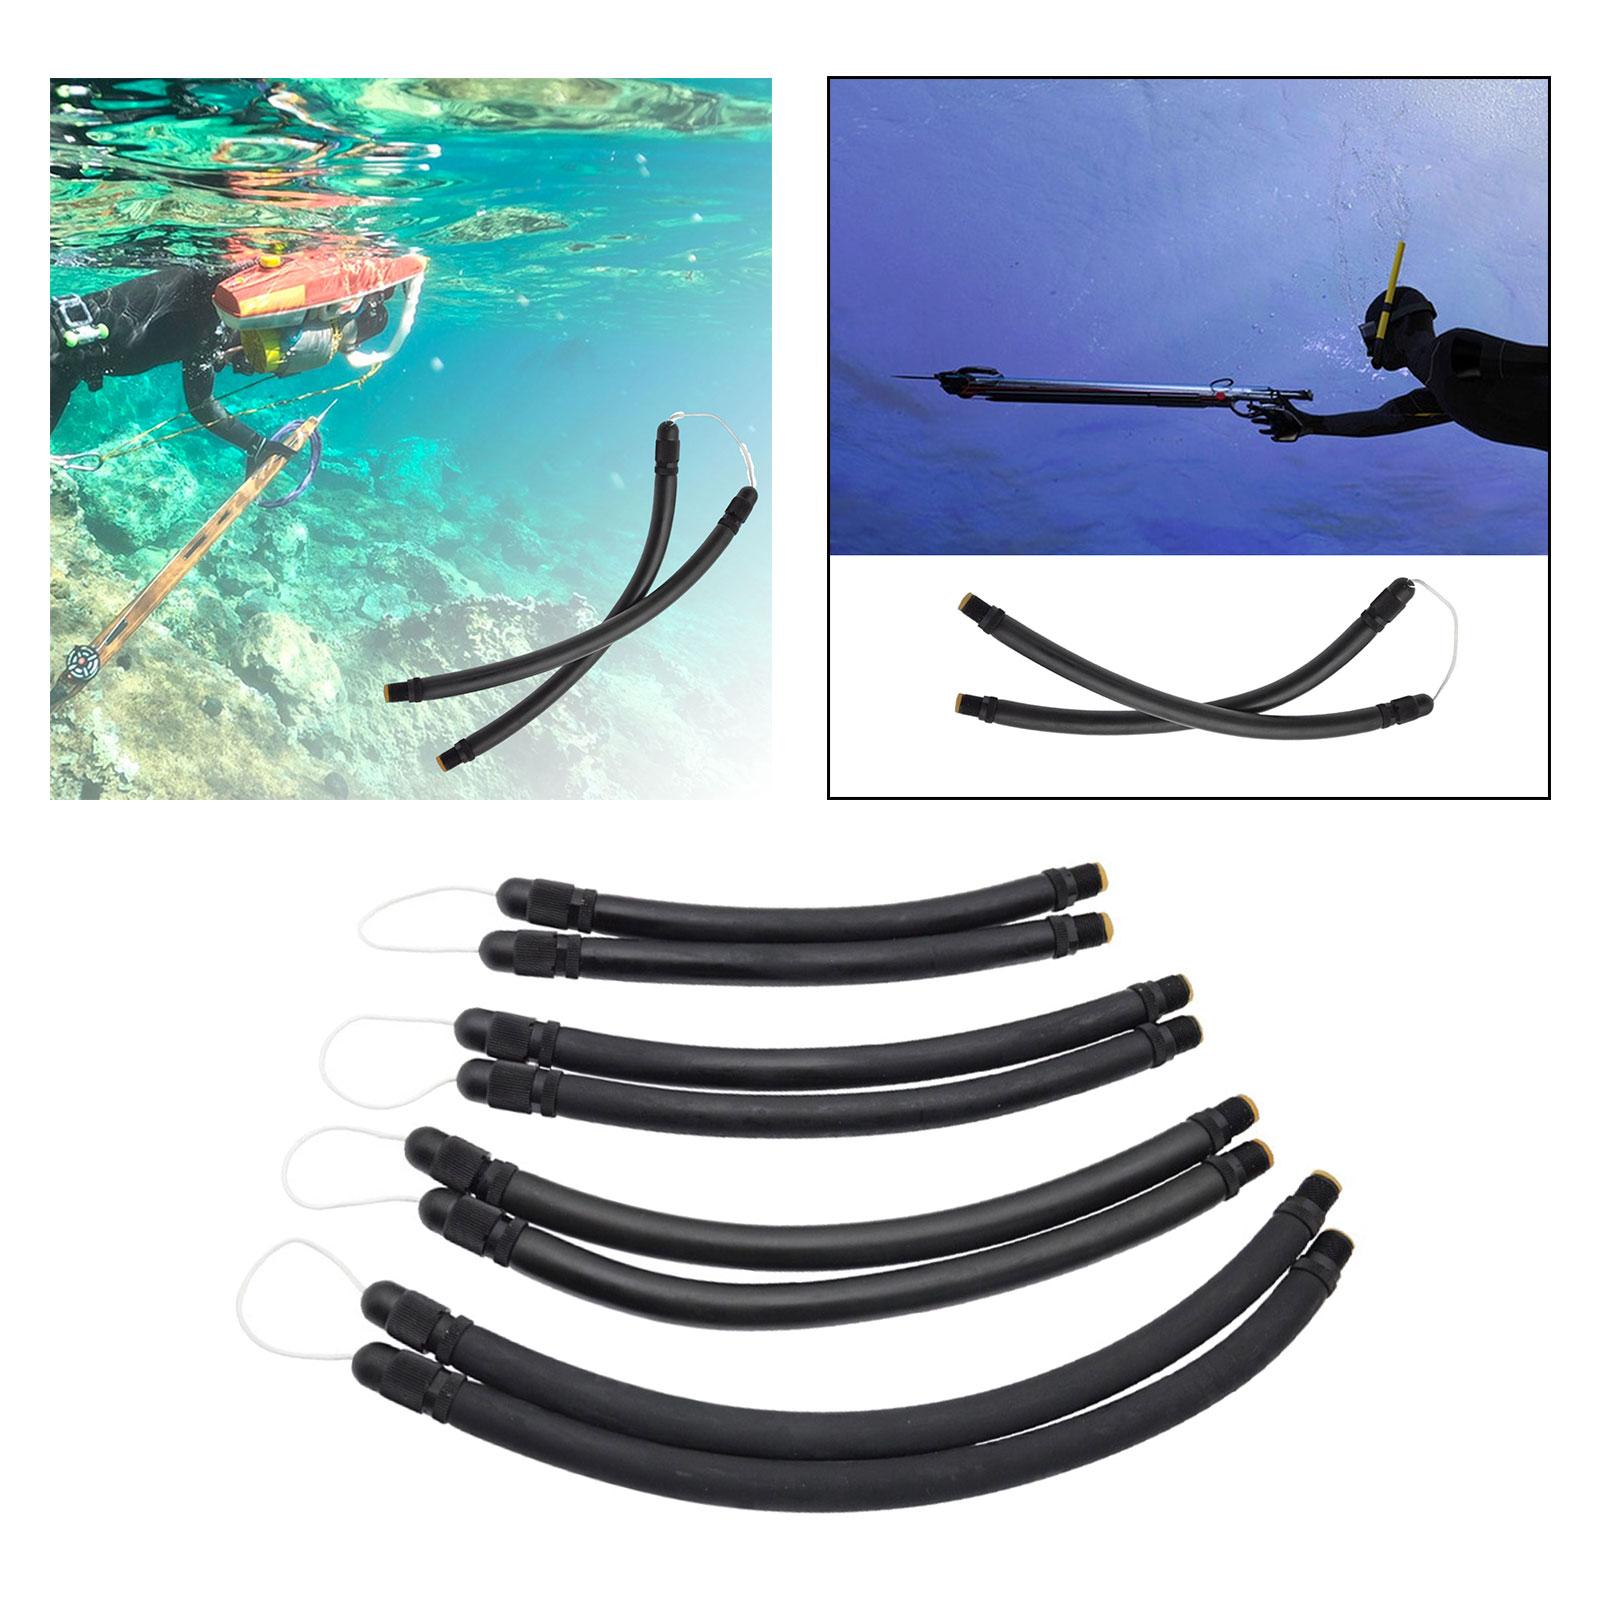 Spear Band Ruer Tube Spearfishing for Outdoor Scuba Diving Accessories